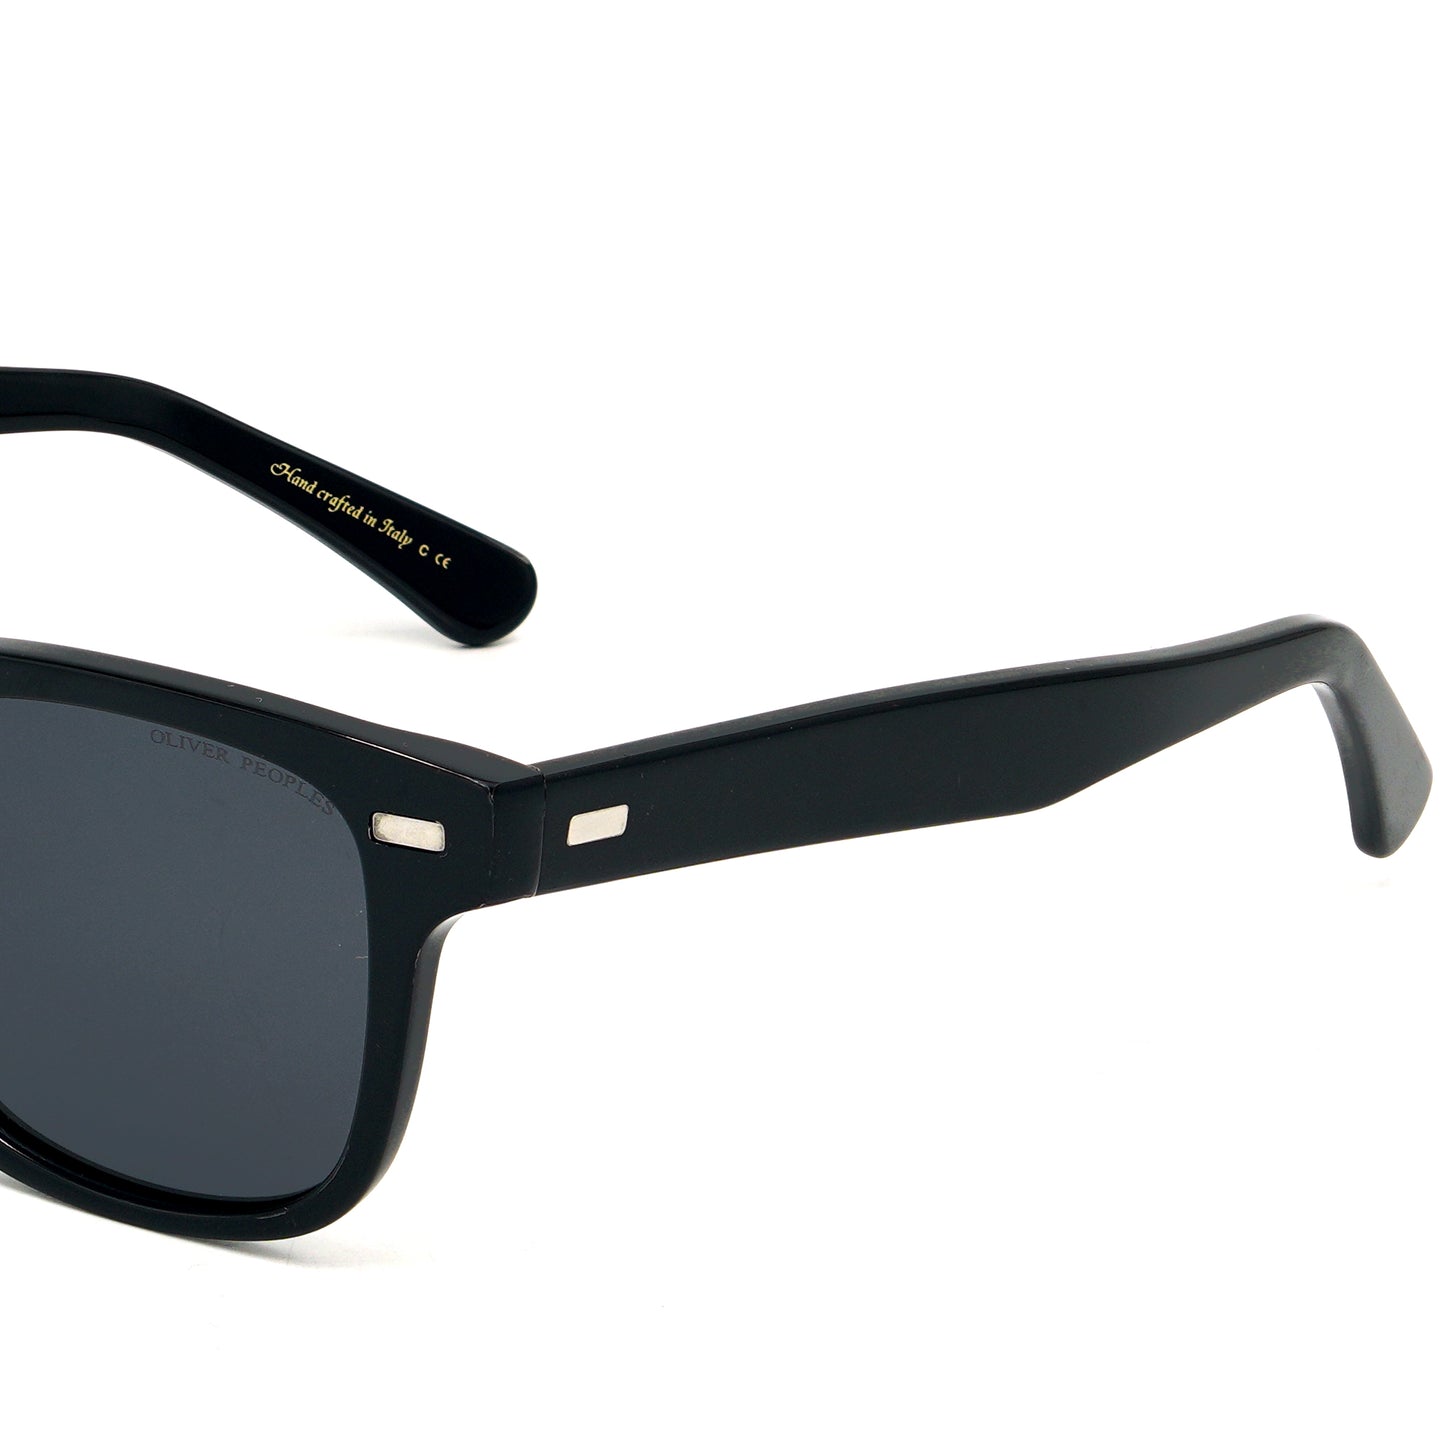 Premium Quality OLIVER PEOPLES Polarized Sunglass | Olevs 93 A